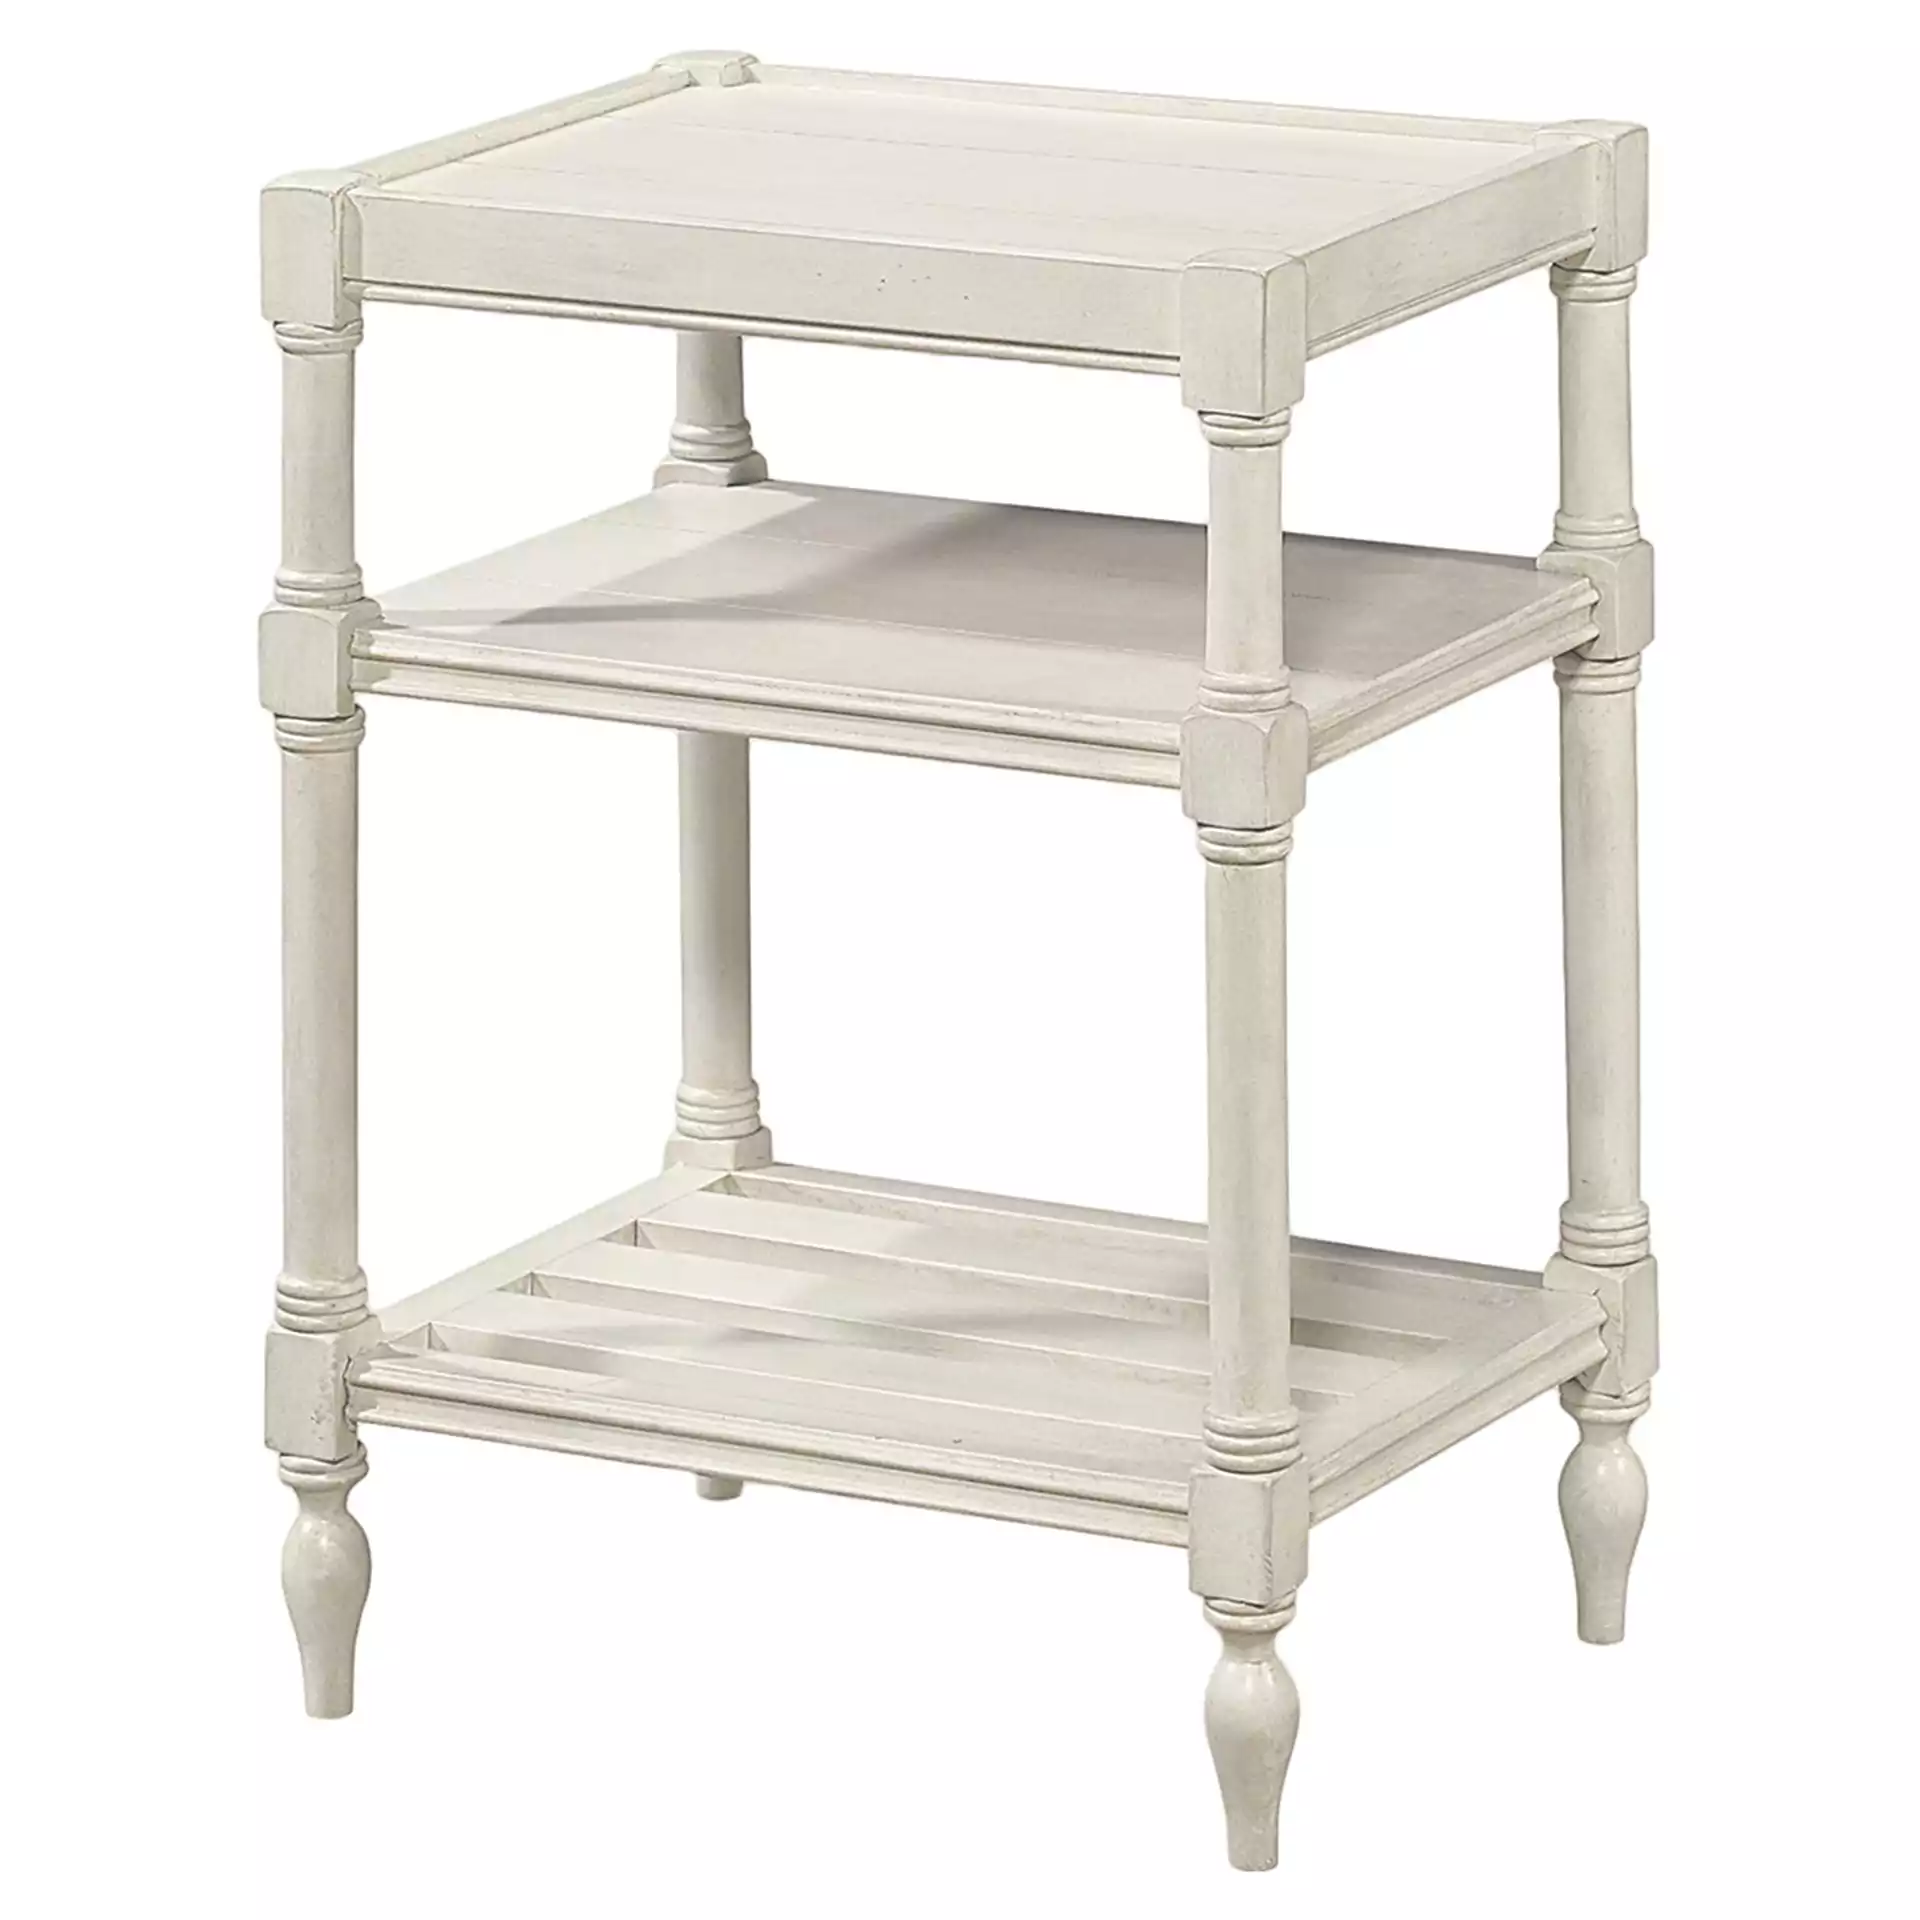 Syver French Country White Wood Rectangular Side End Table